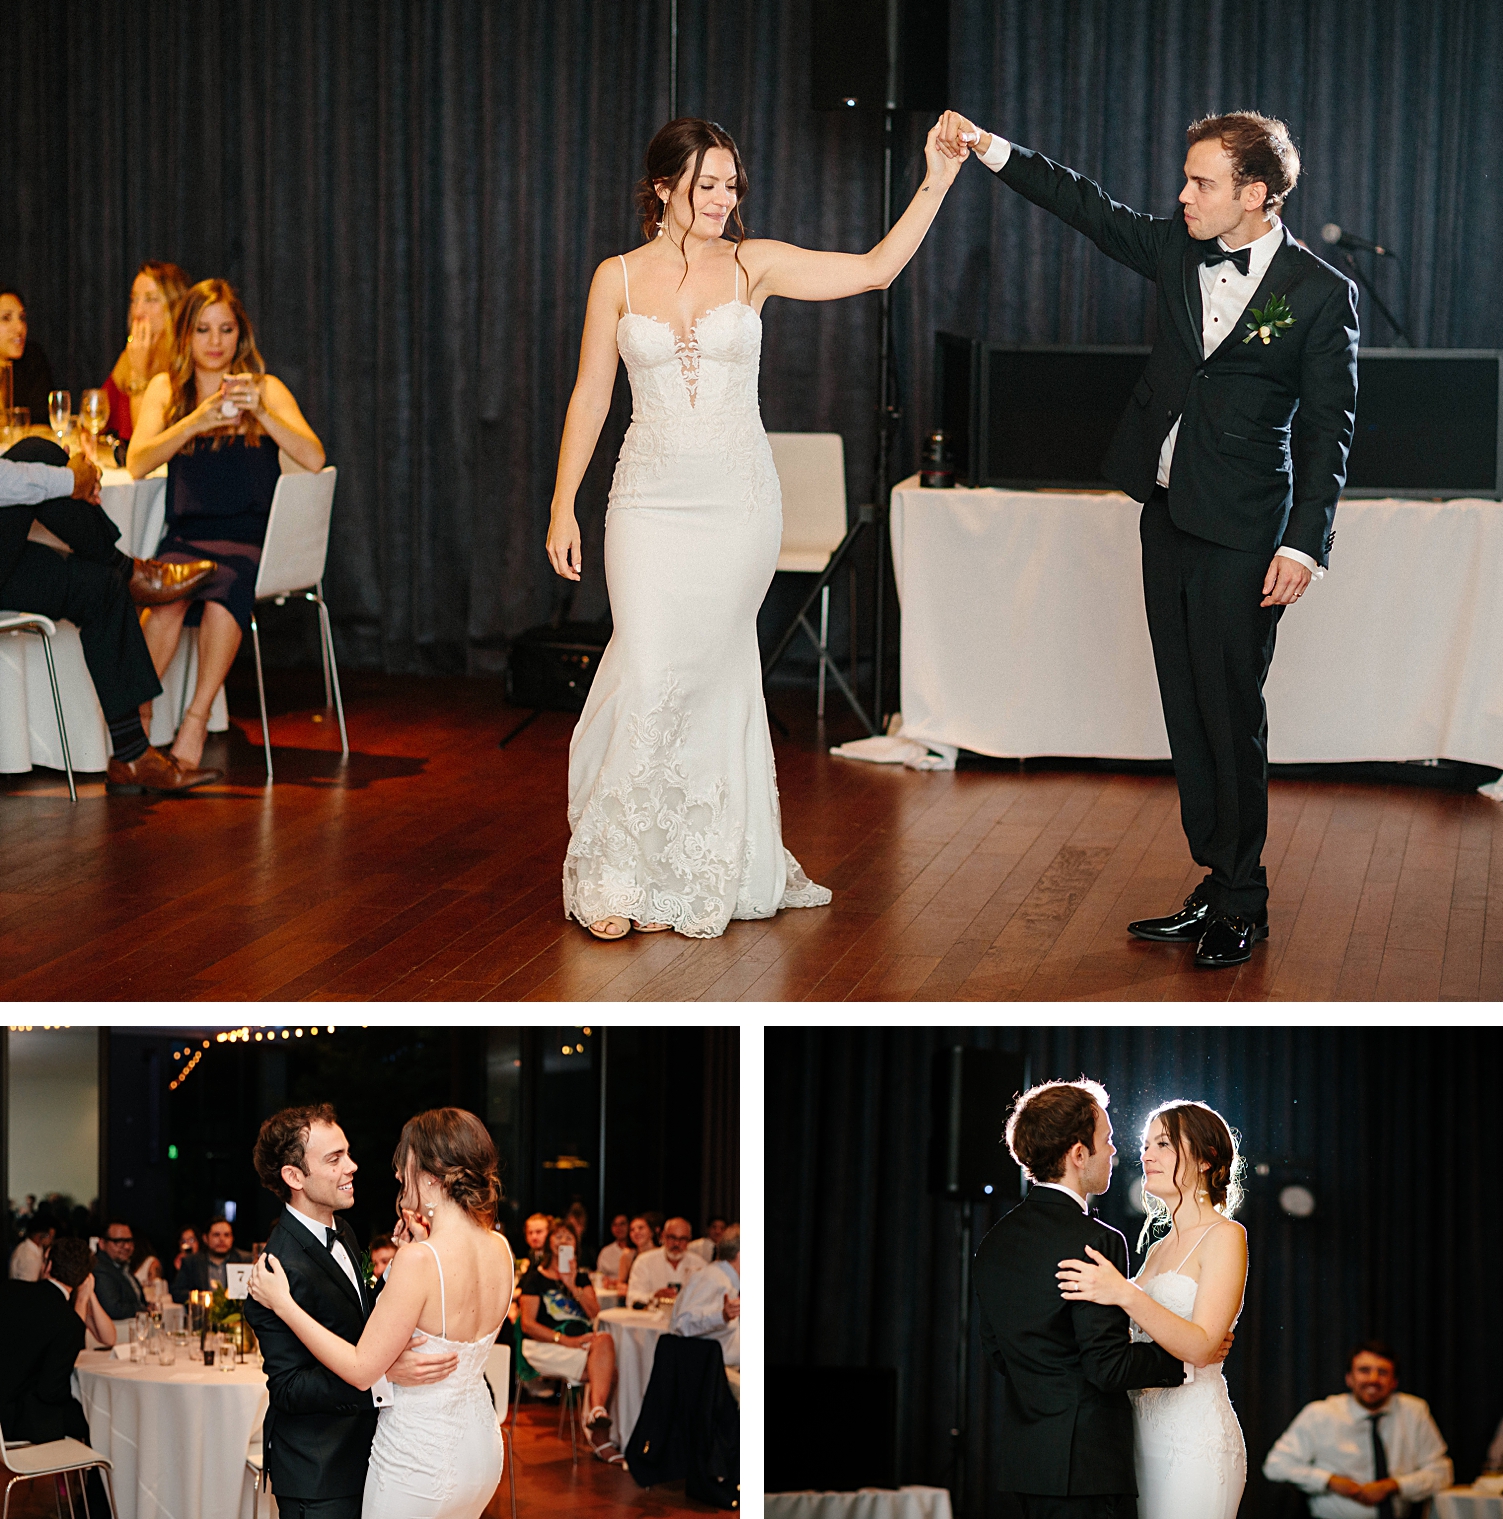 Bride and groom first dance wedding reception